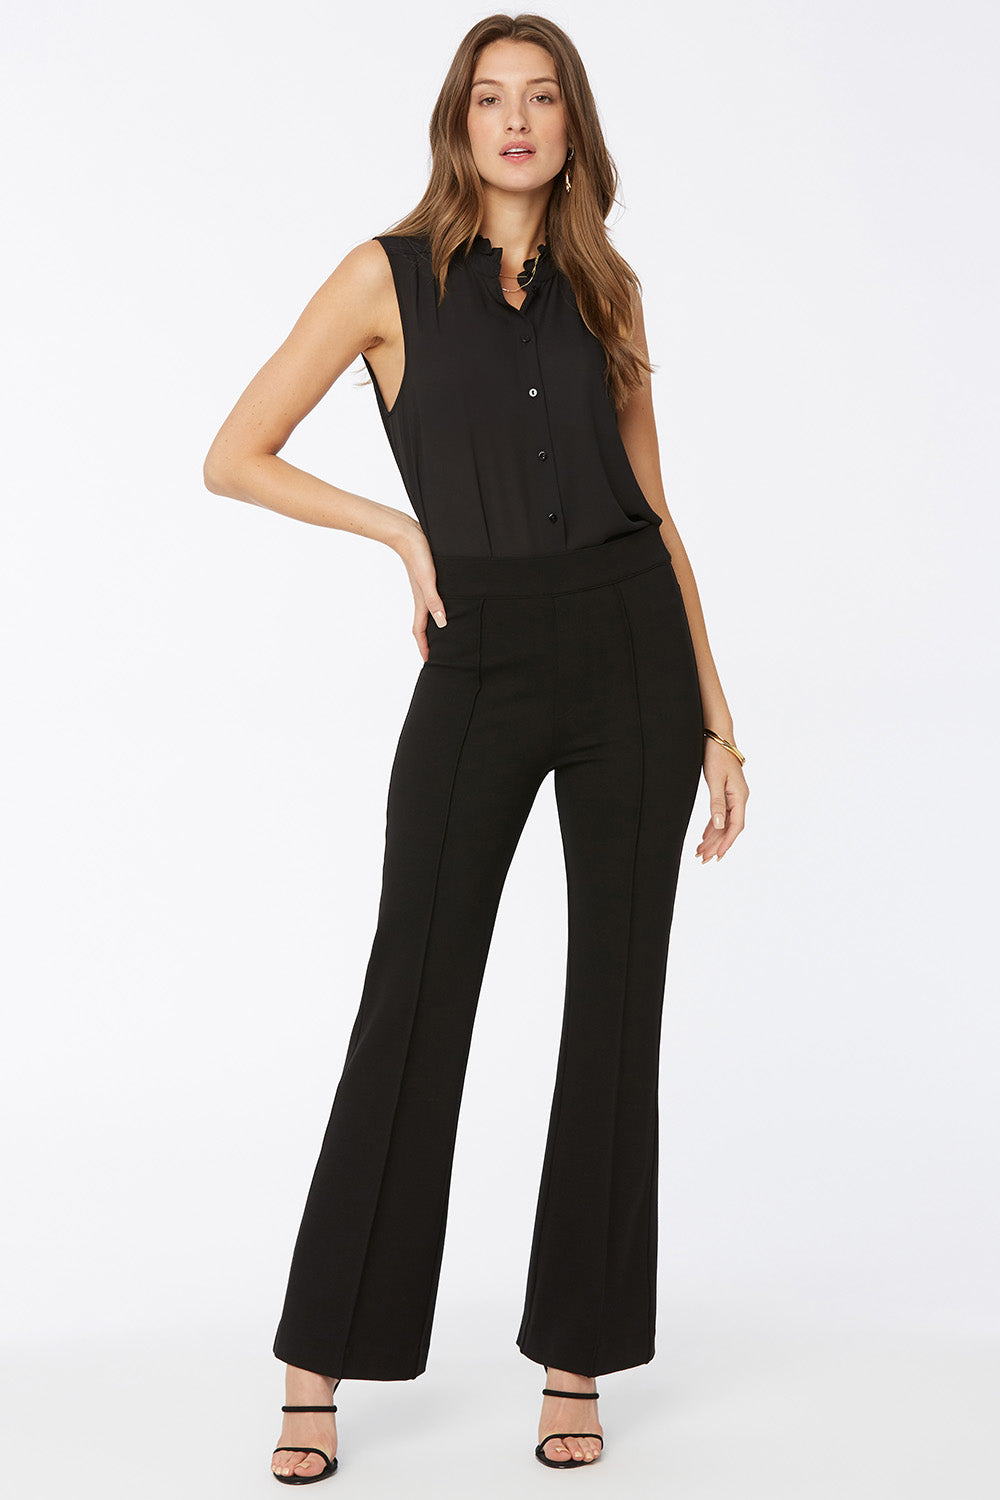 Black High Waisted Flared Trousers